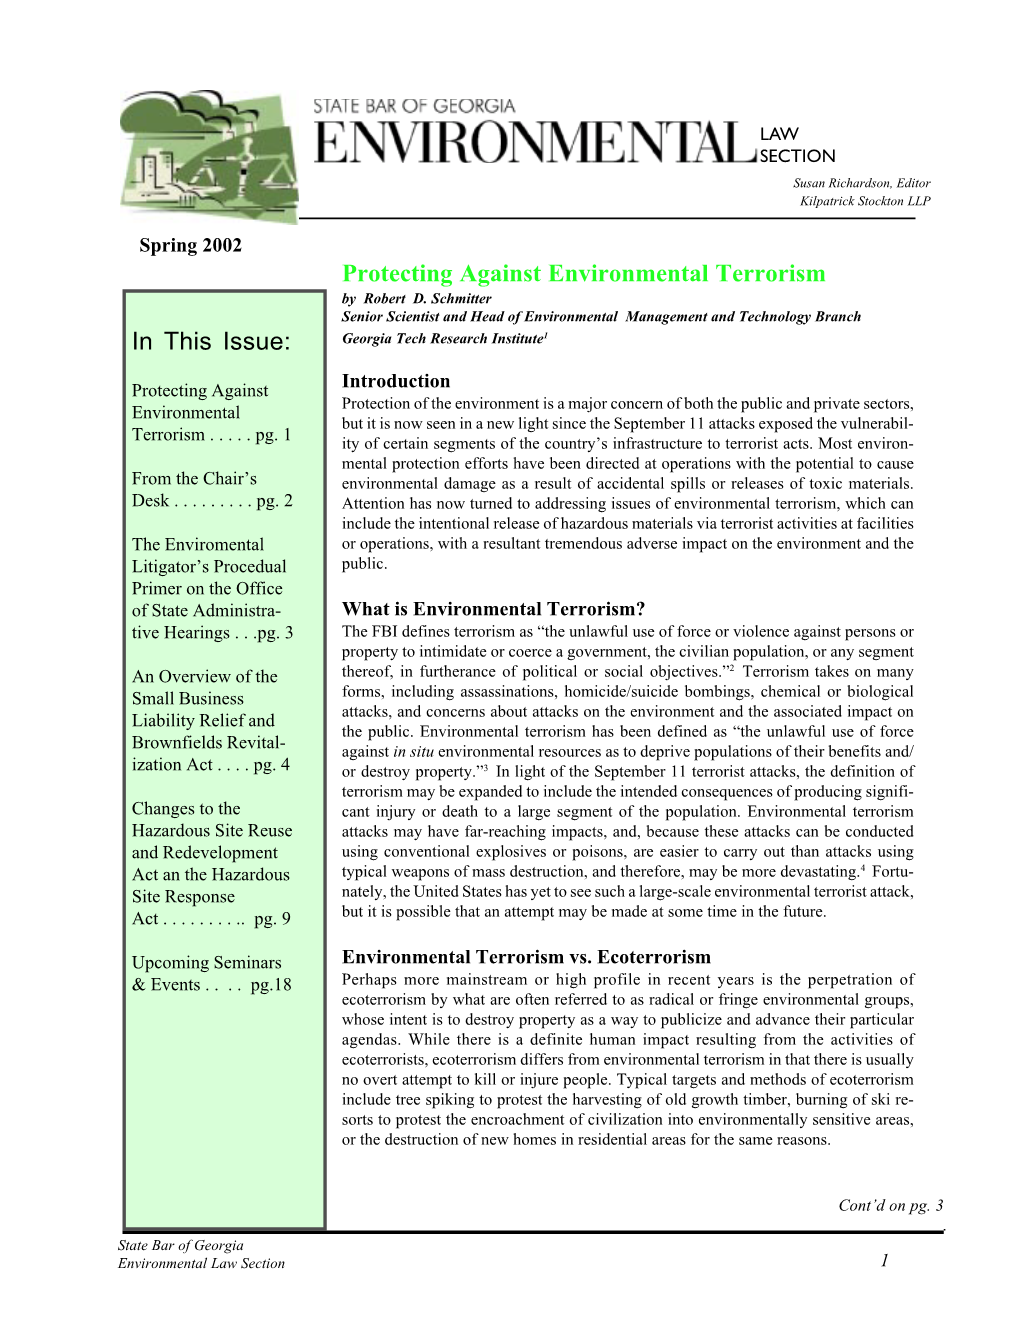 Environmental Law Section Newsletter